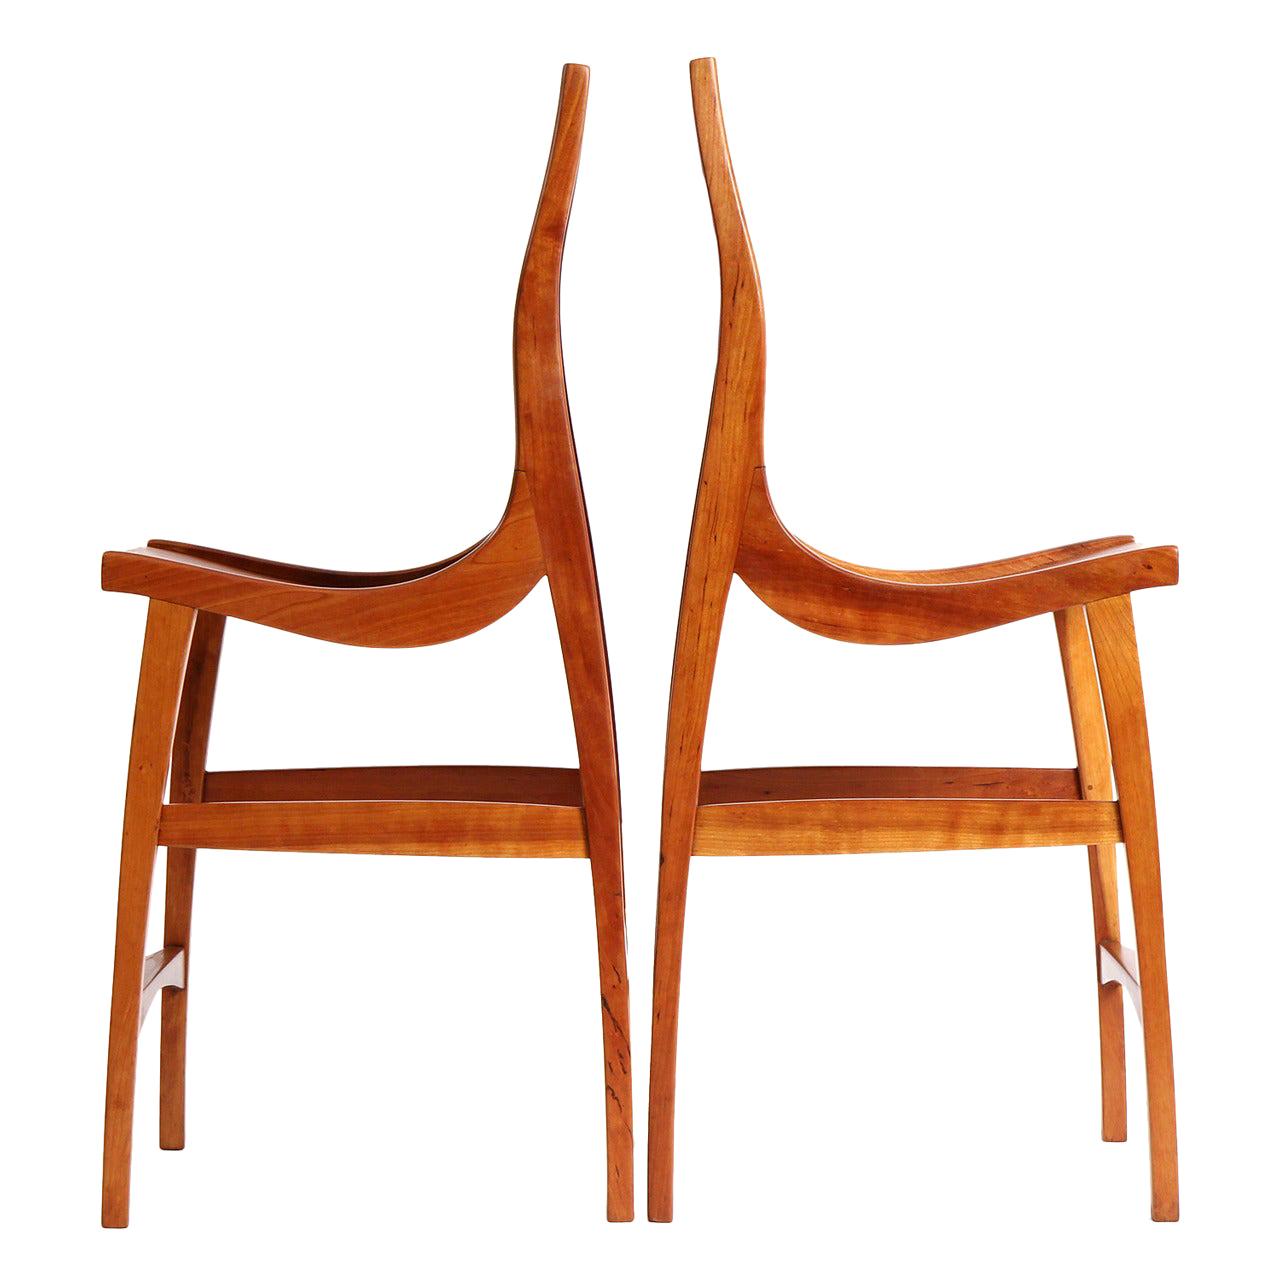 Pair of Sculptural High Chairs by Jere Osgood